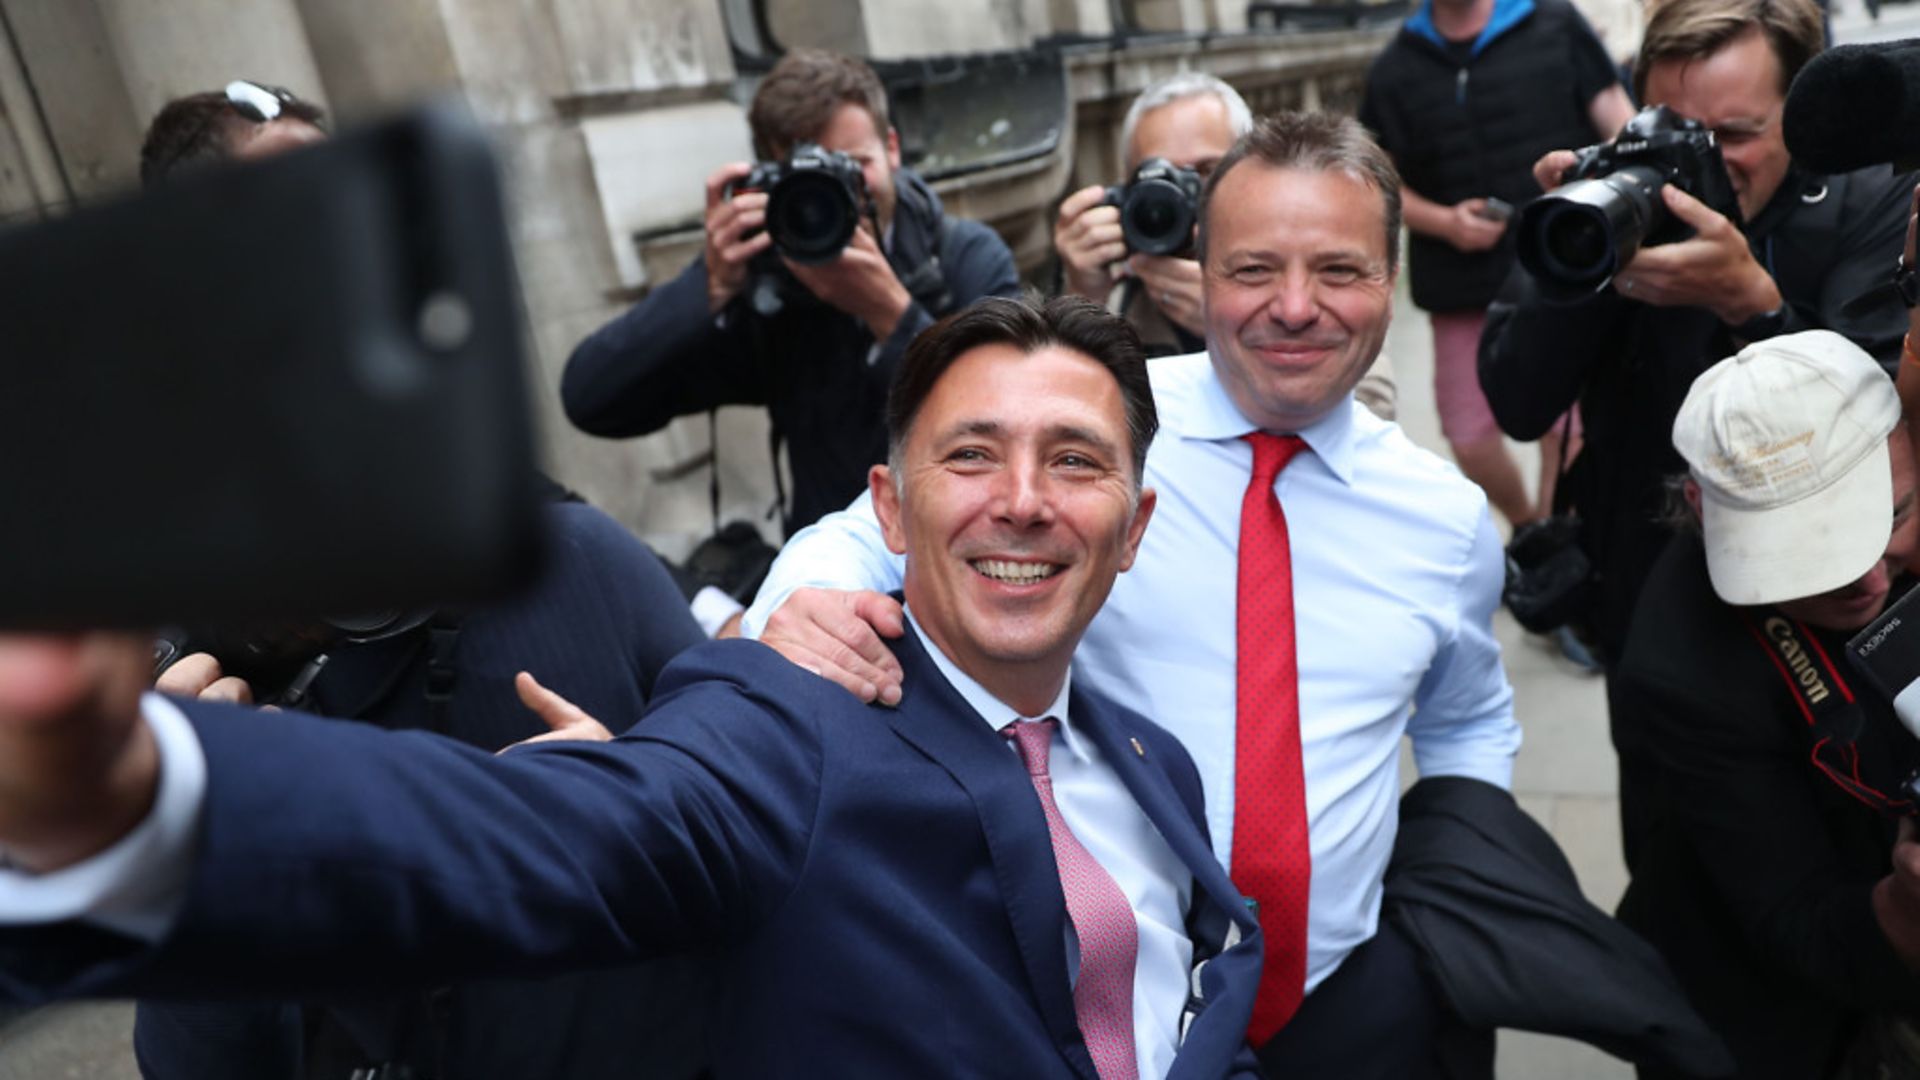 Brexit campaign donor and businessman Arron Banks (right) with Leave.EU campaigner Andy Wigmore in 2018. - Credit: AFP via Getty Images